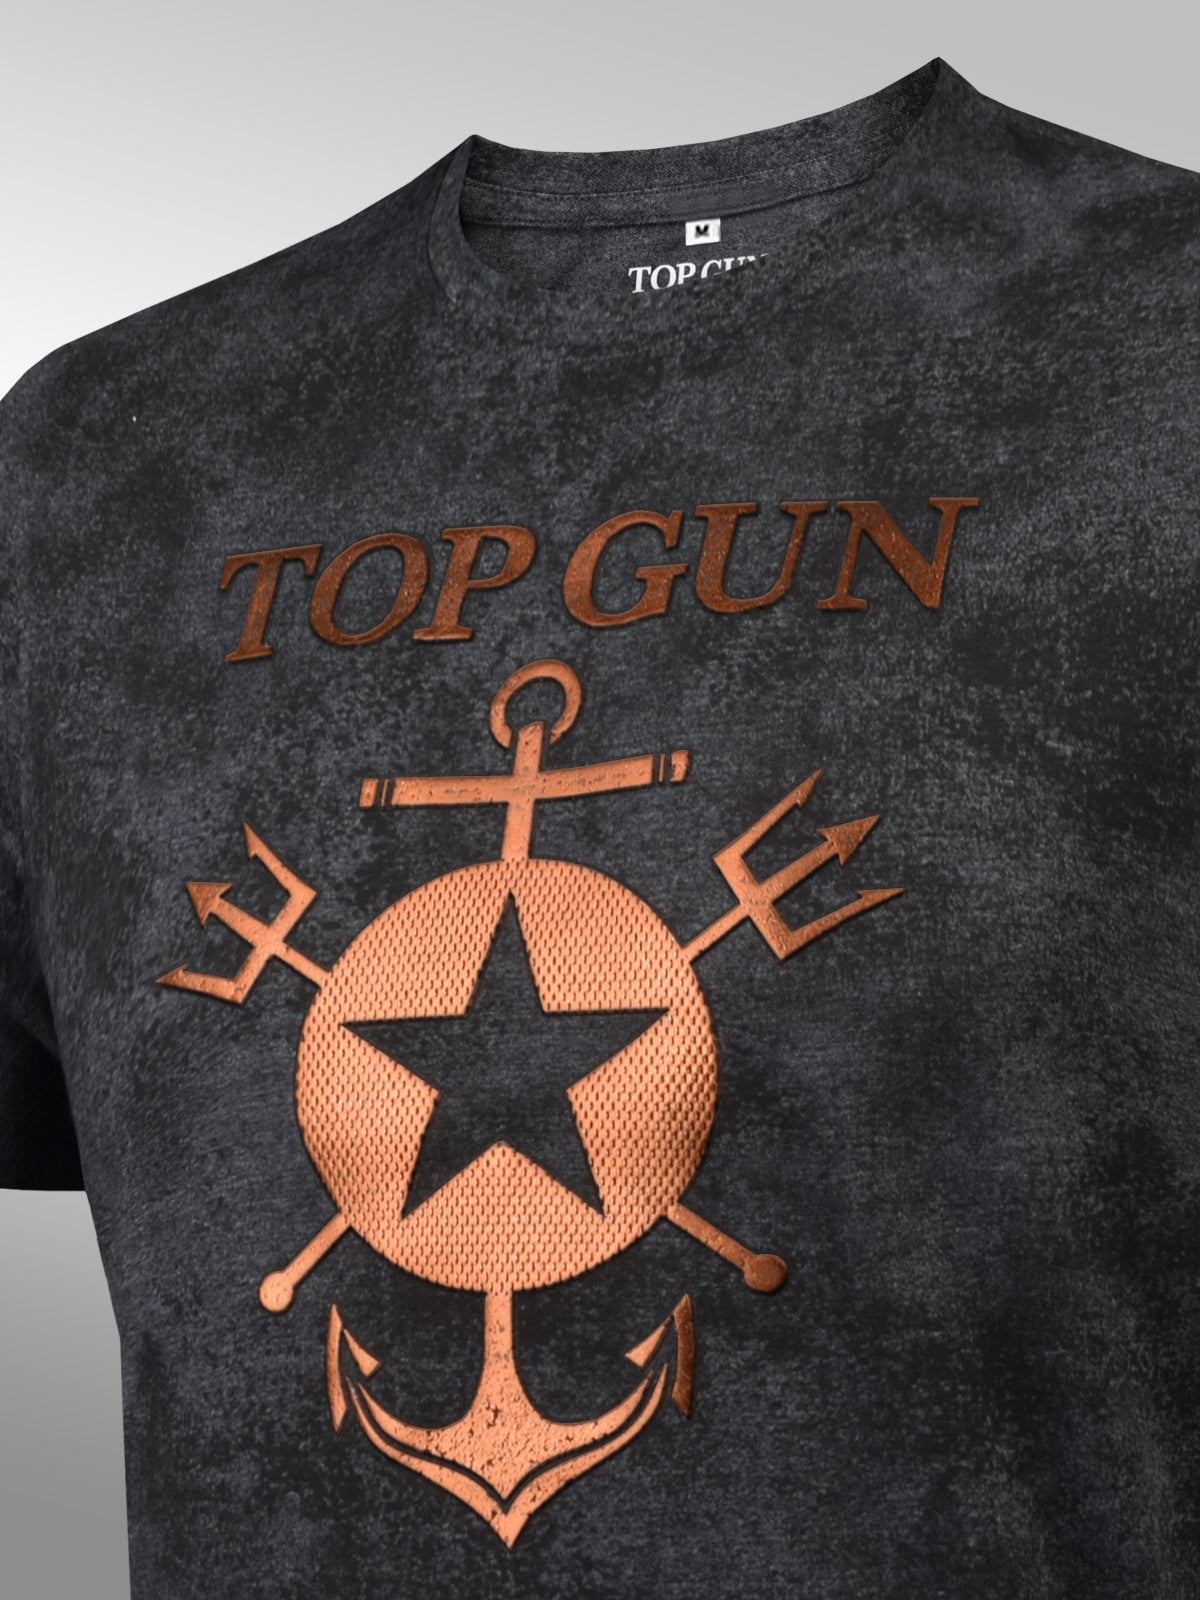 Because I Was Inverted Top Gun Tee: Essential for Fans! – Top Gun Fans